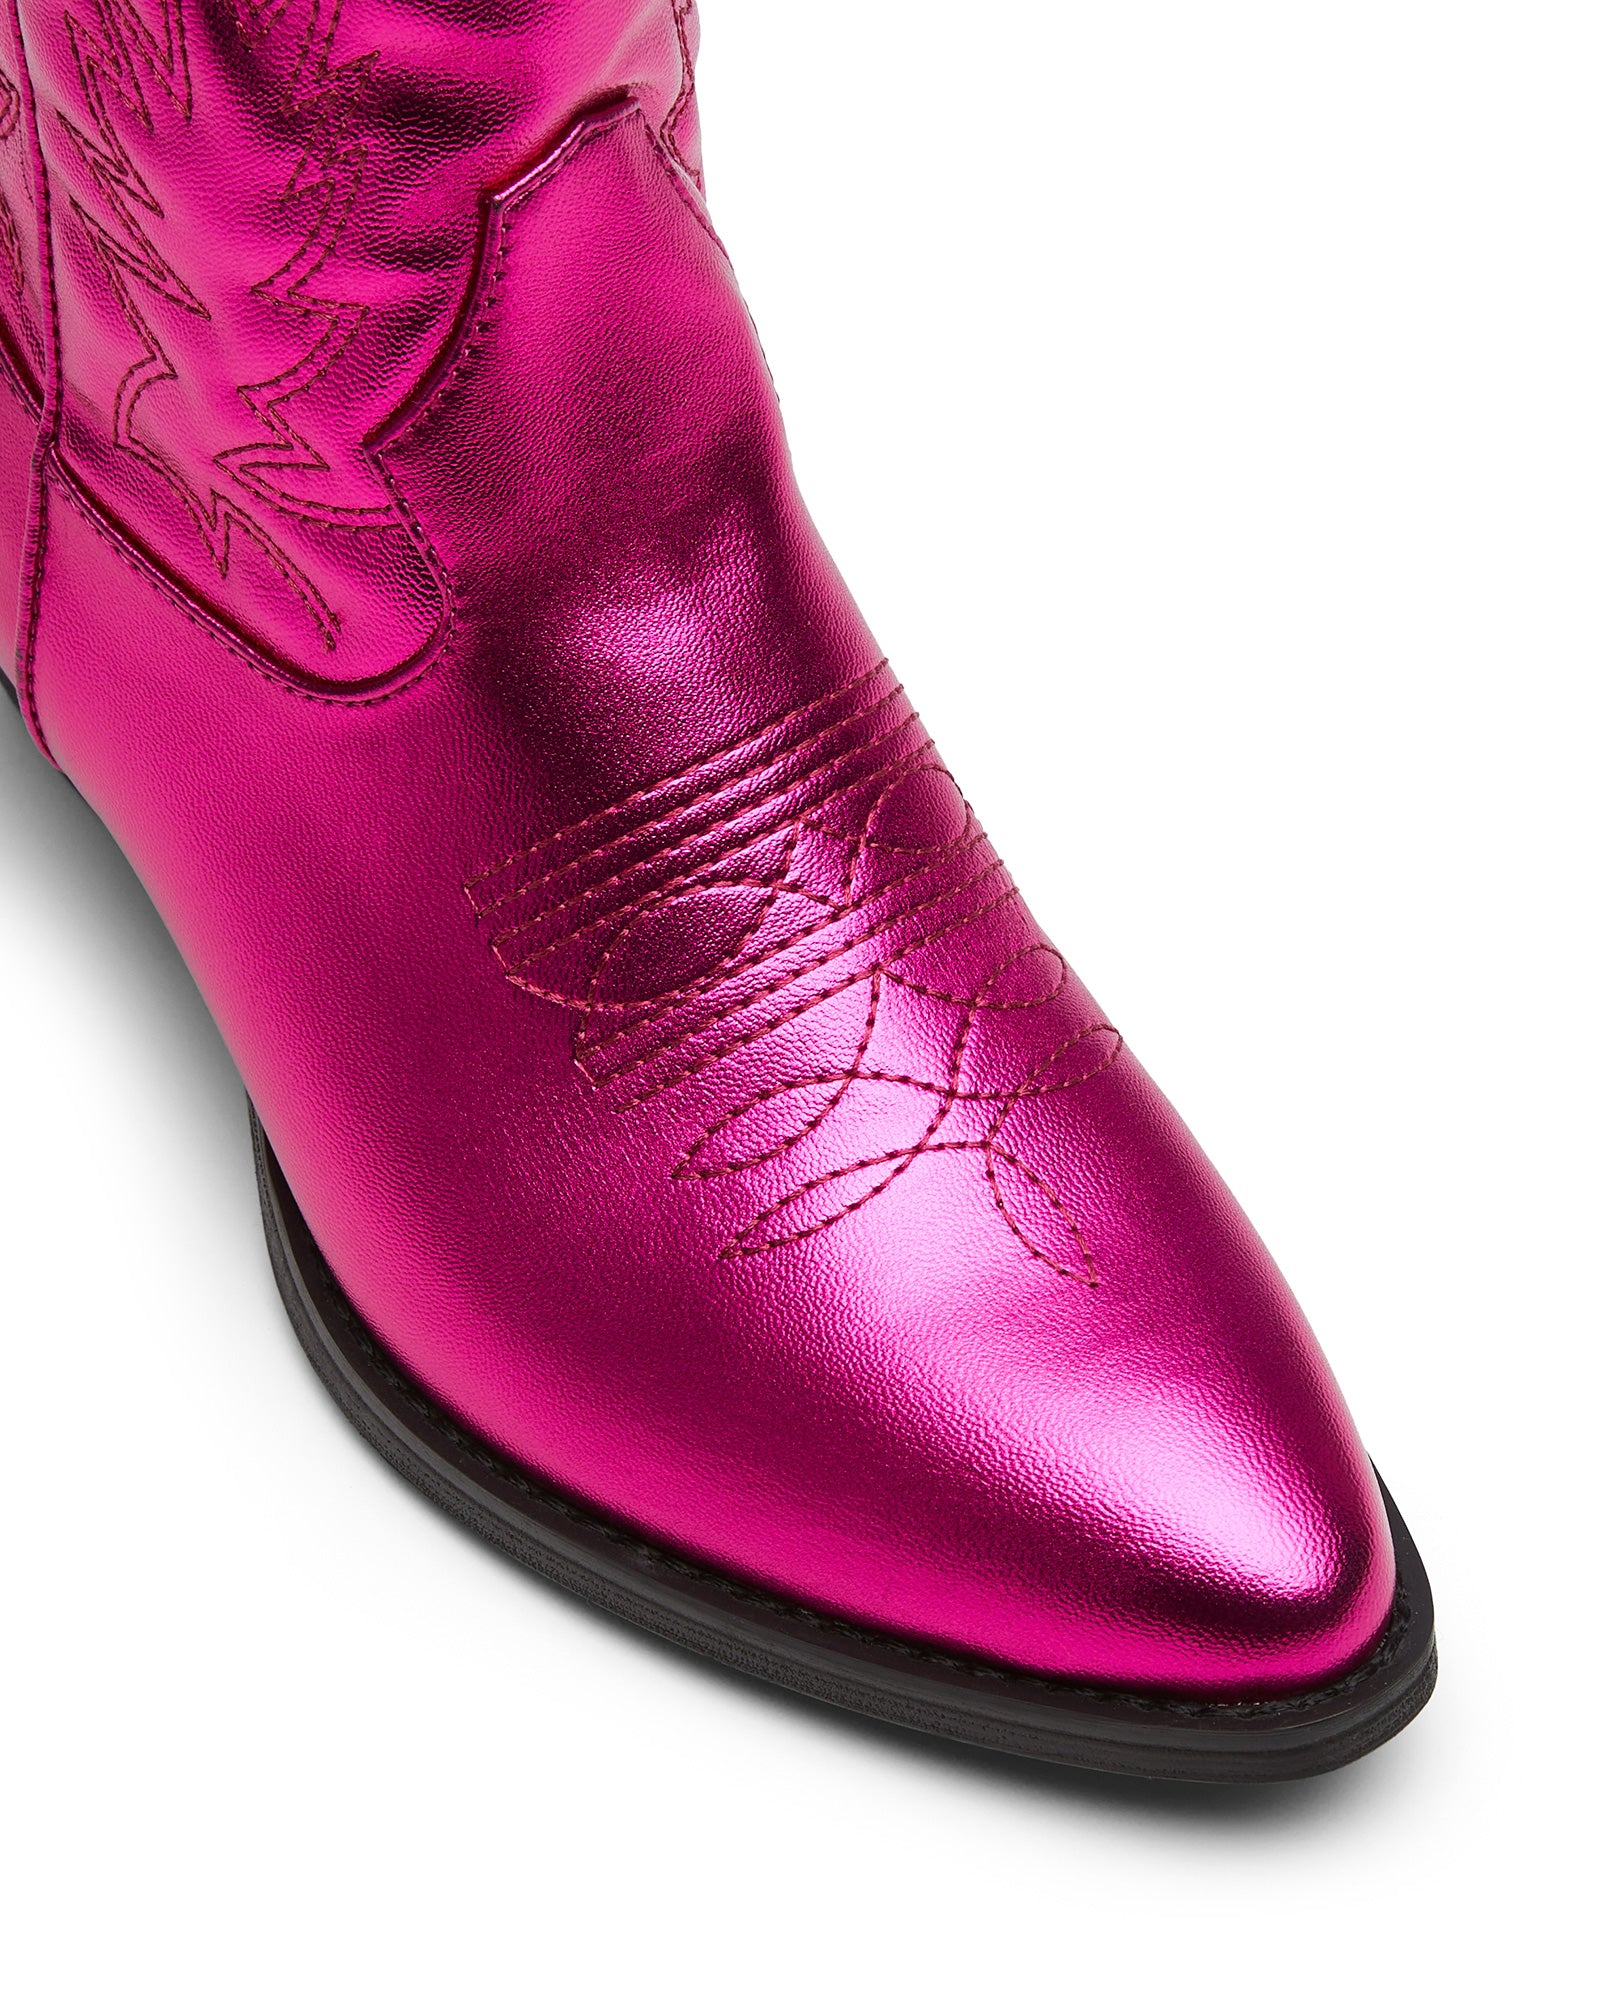 Therapy Shoes Wilder Metallic Pink | Women's Boots | Western | Cowboy | Short